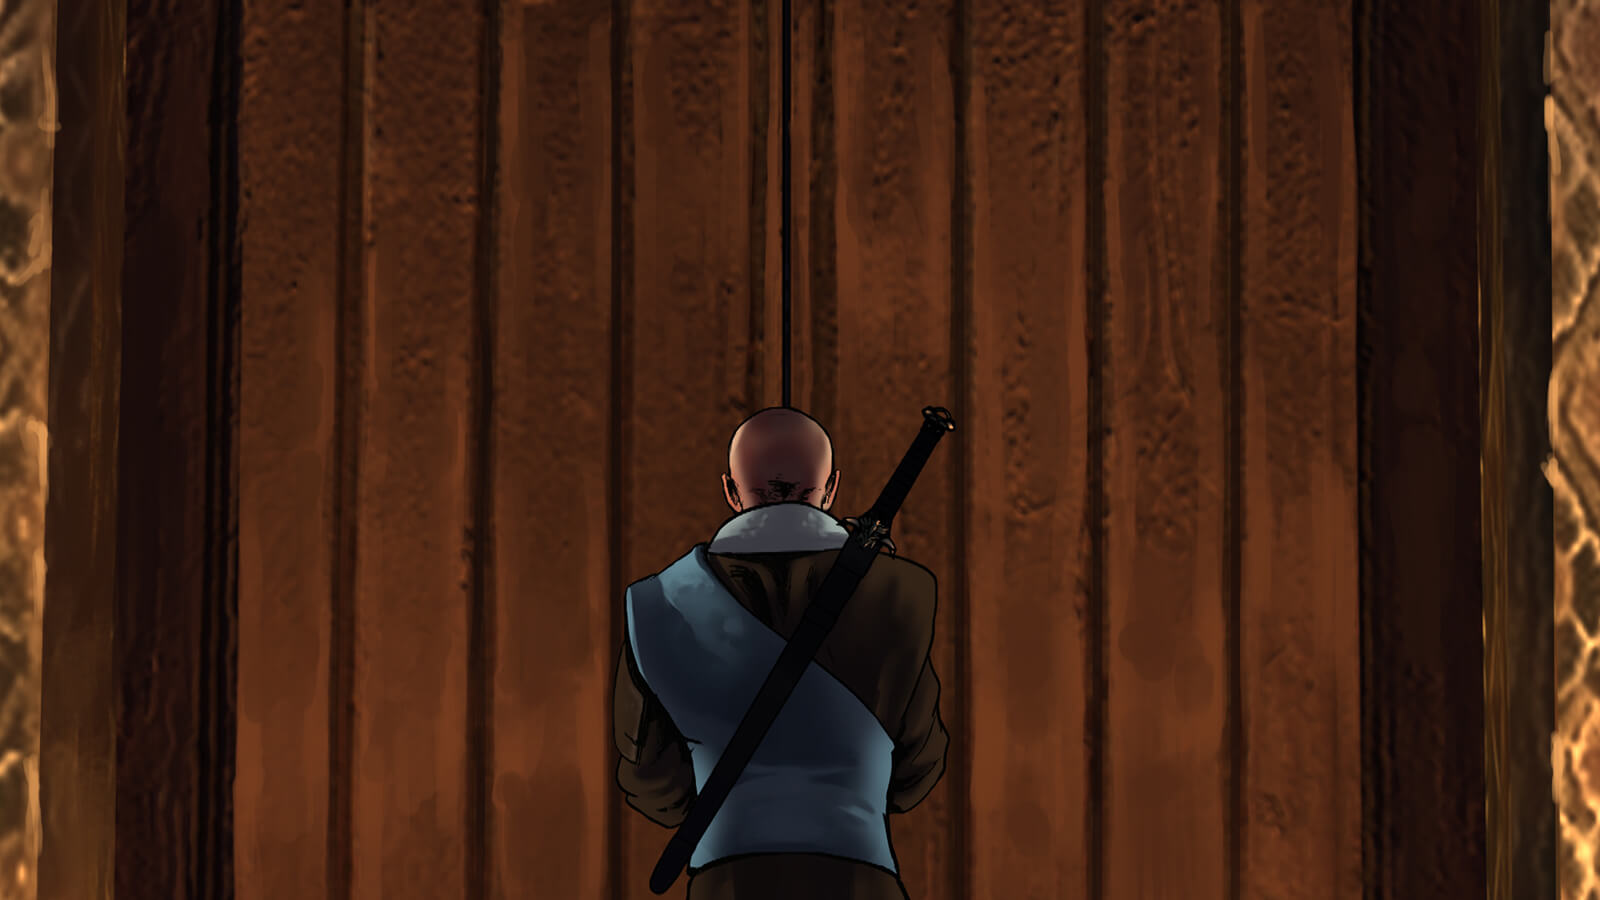 A bald man seen from behind with a sword slung over his back stands at a tall wooden door